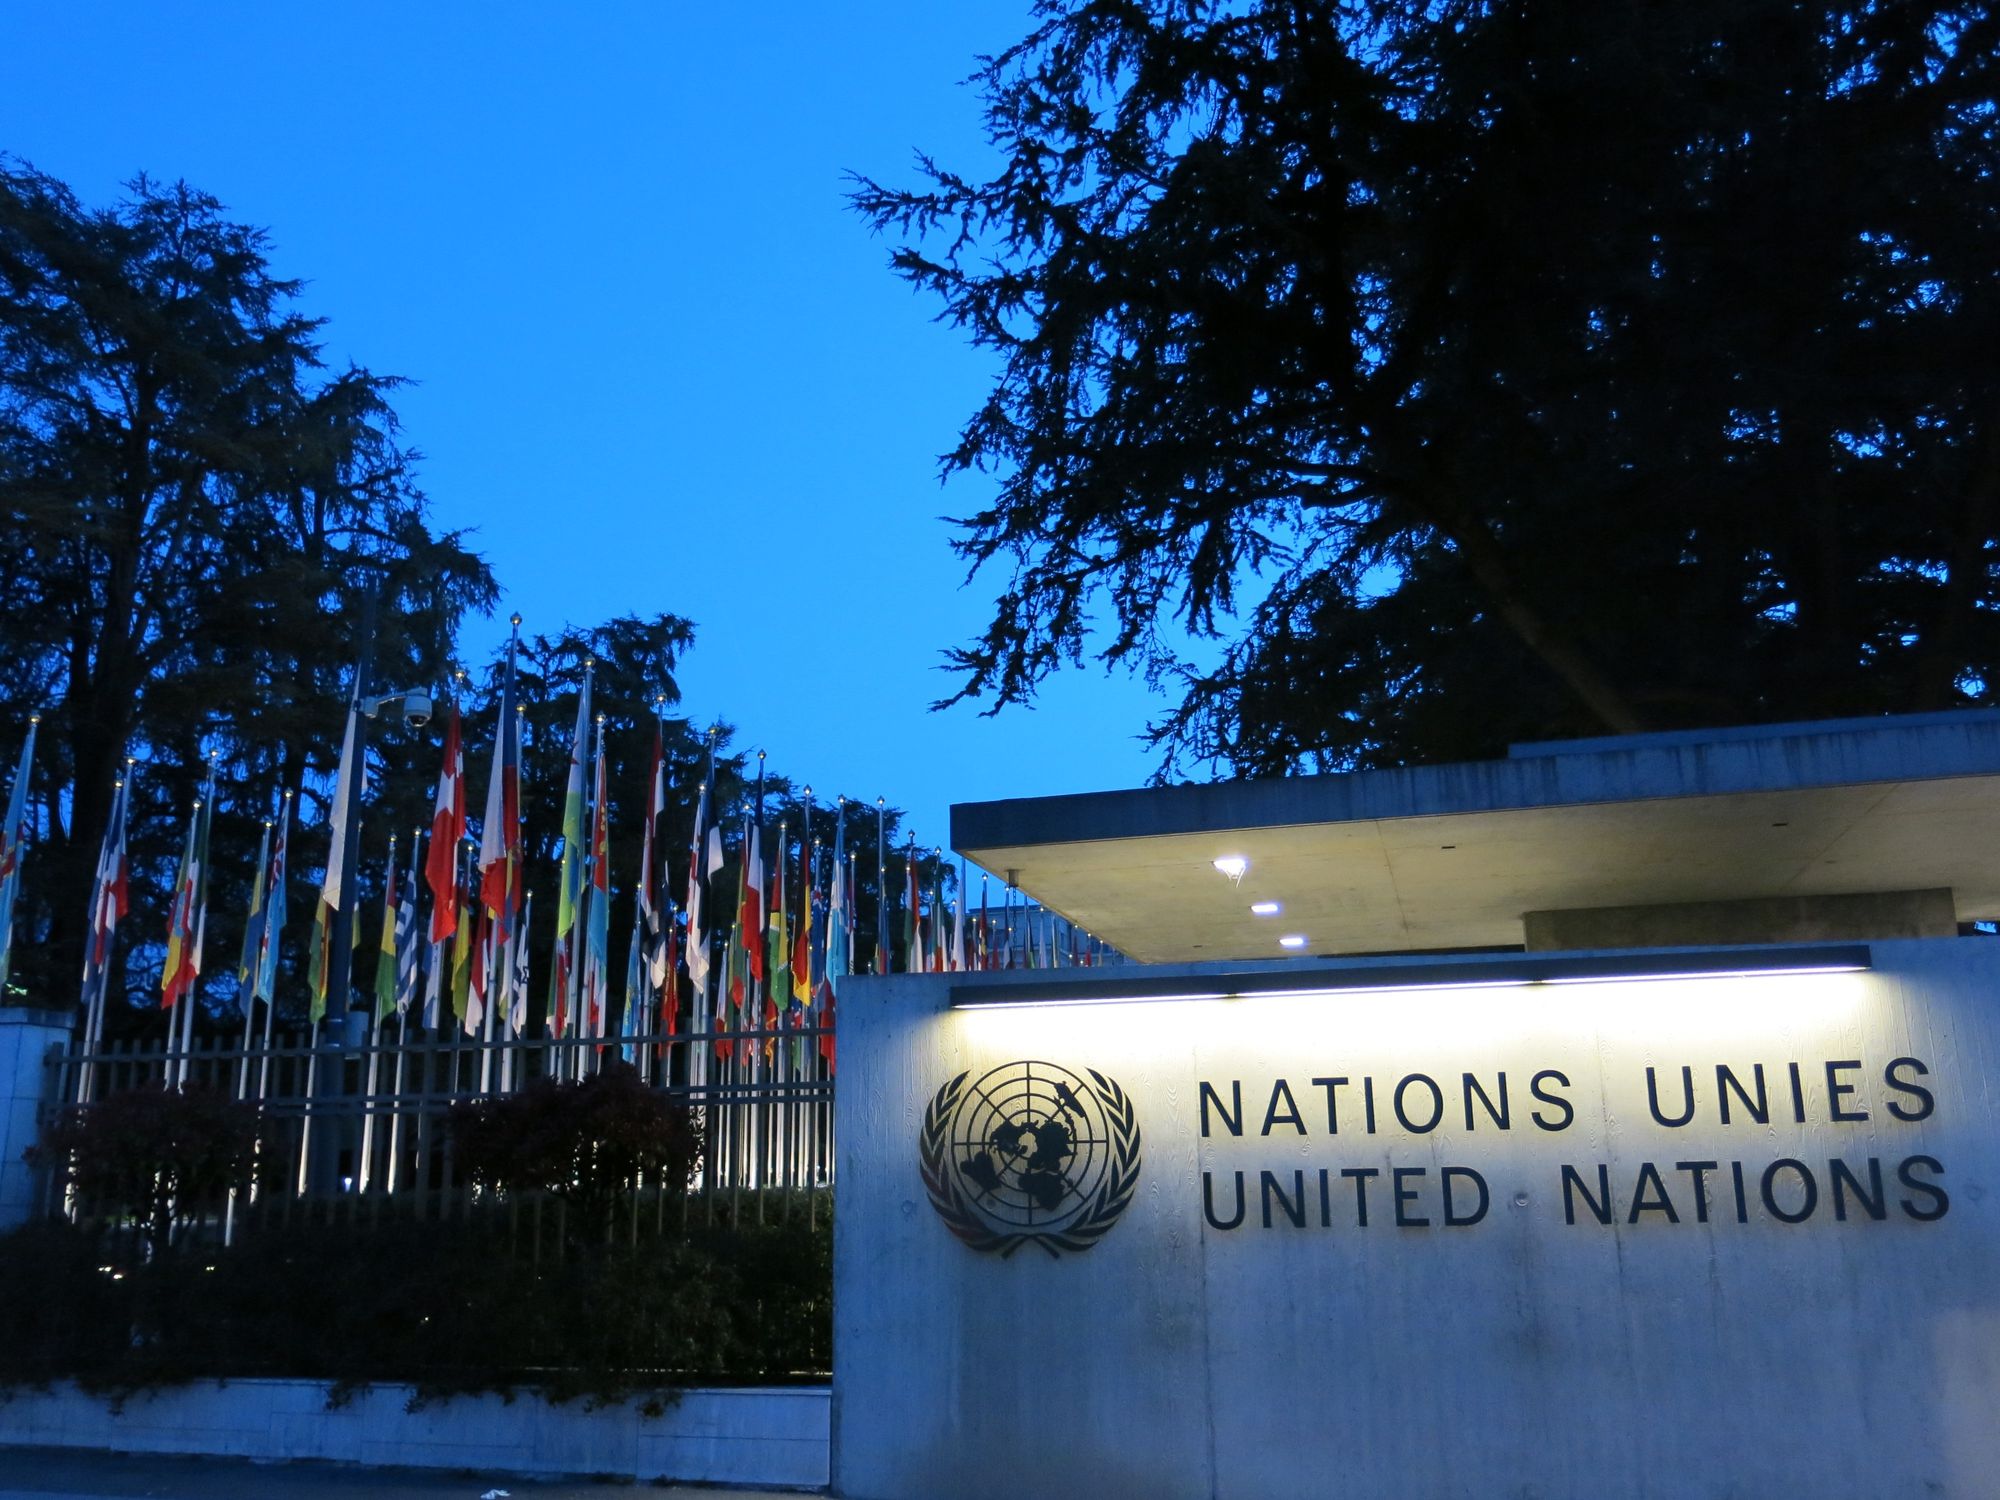 The entrance to the Palais des Nations in Geneva